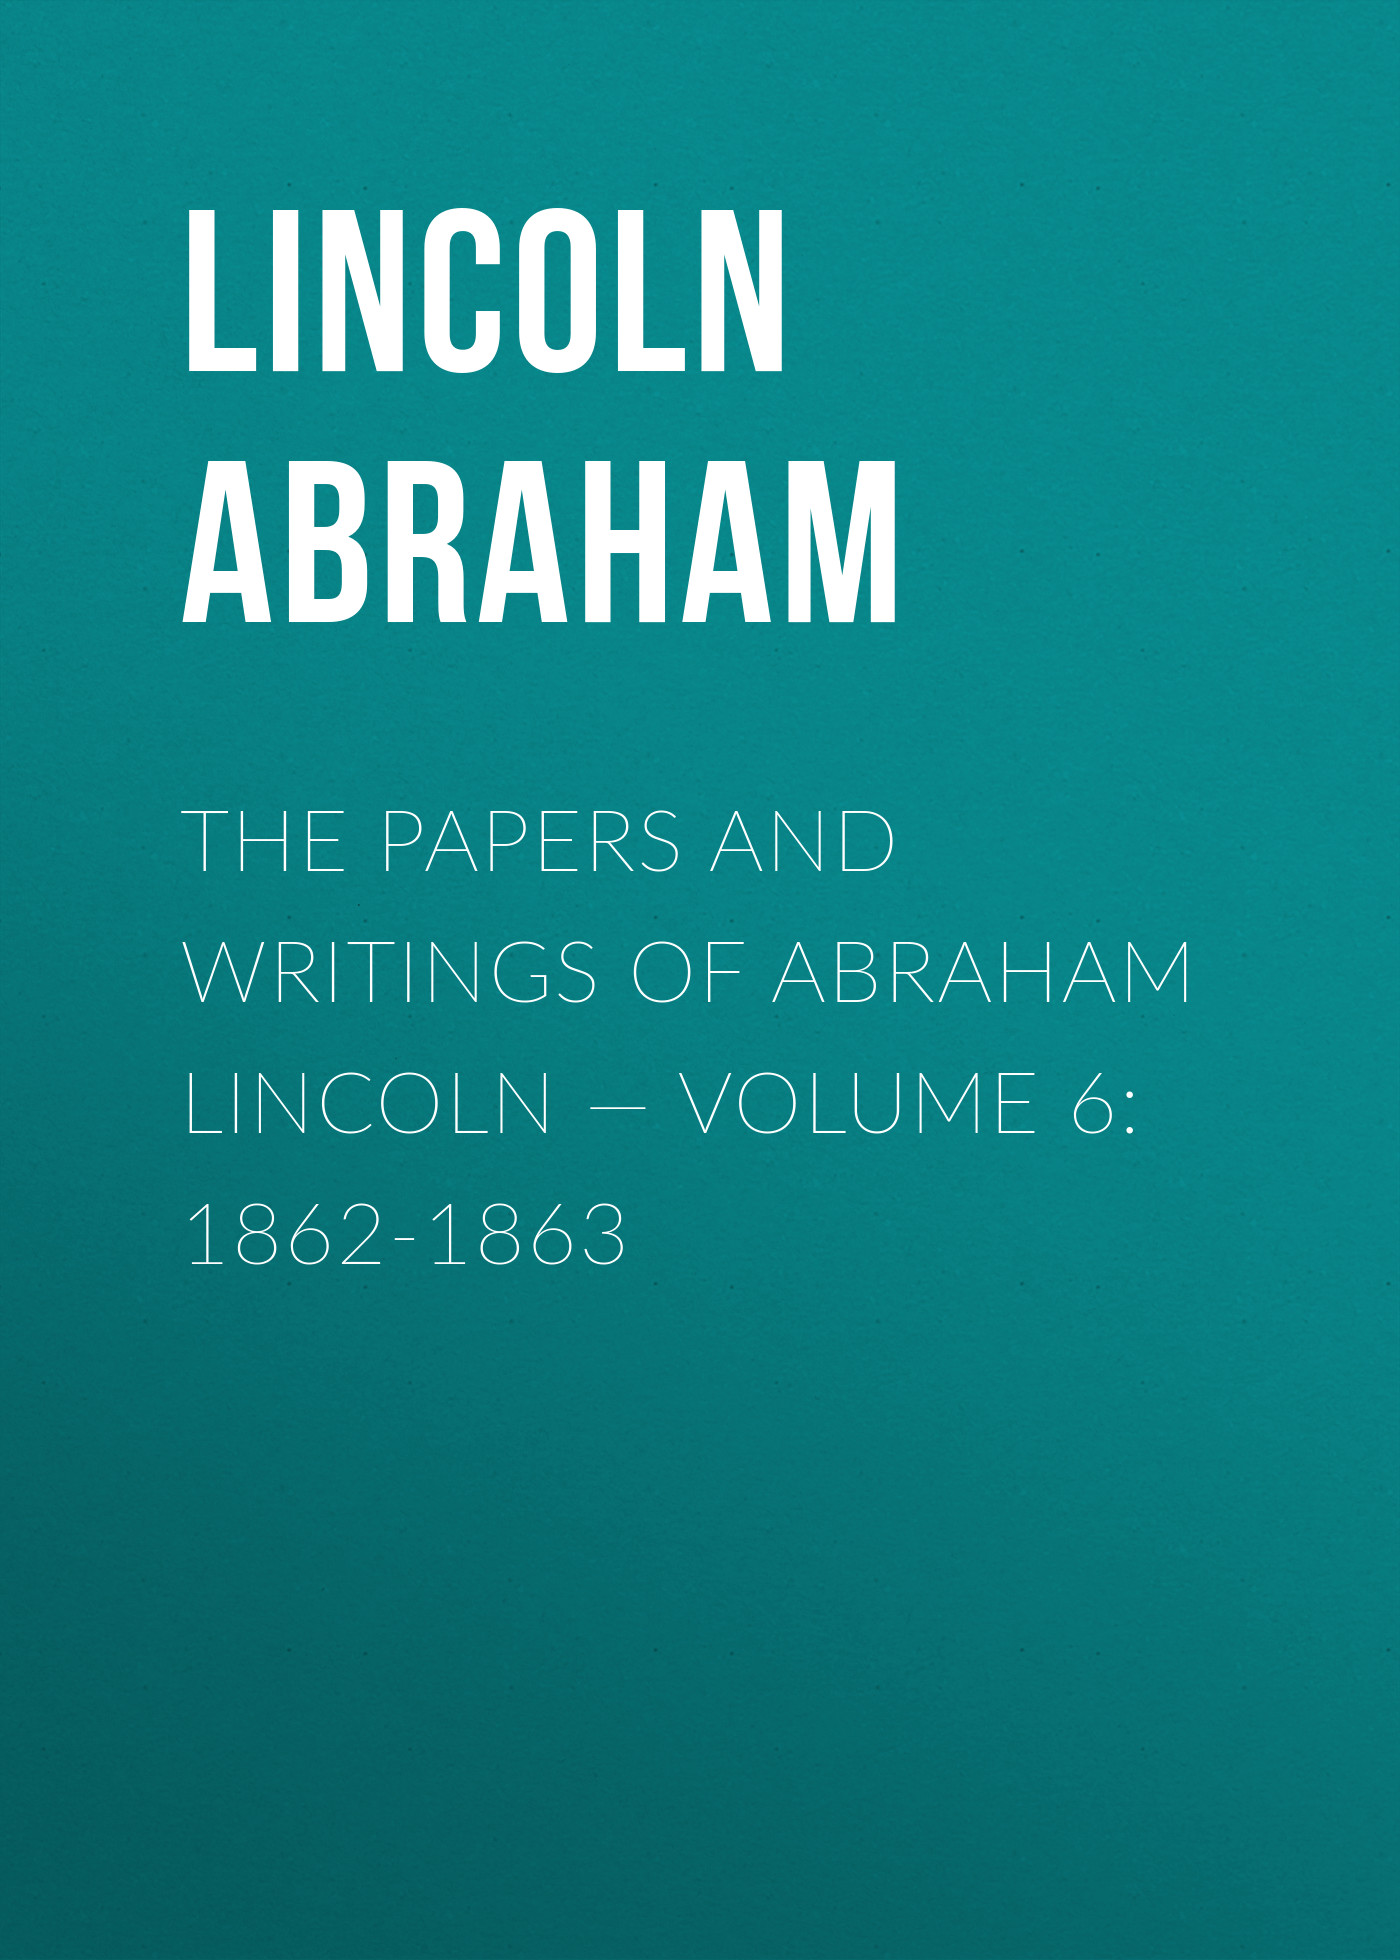 The Papers And Writings Of Abraham Lincoln — Volume 6: 1862-1863